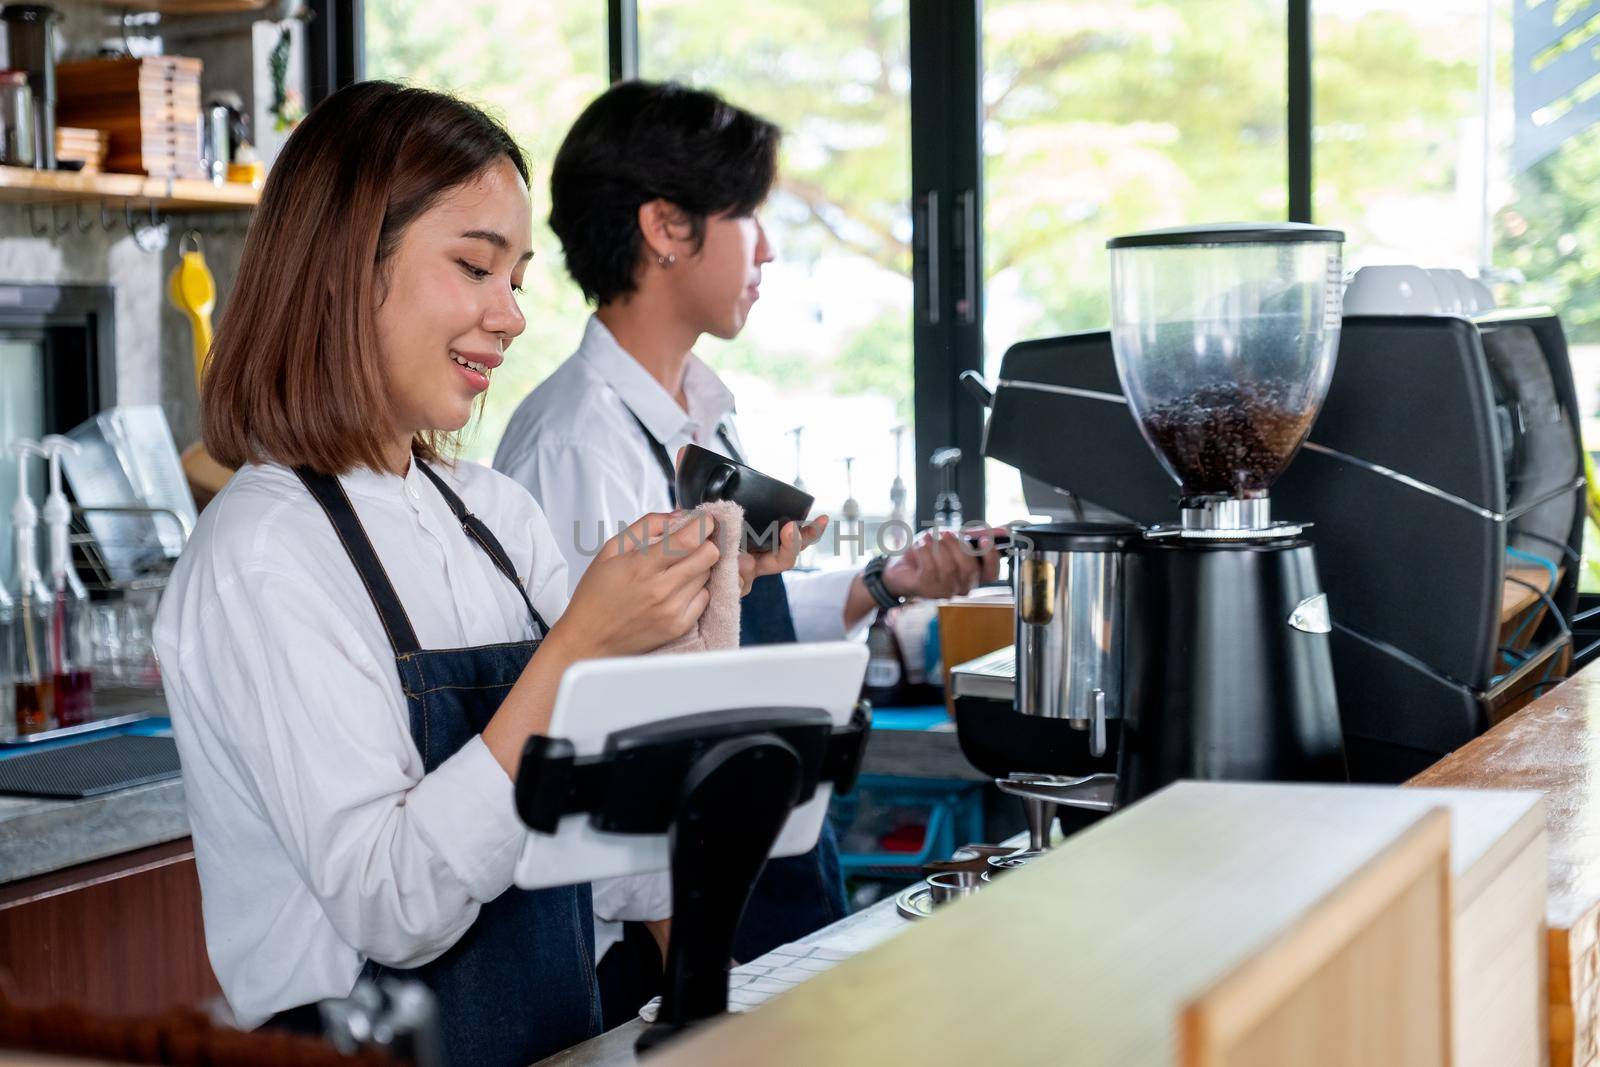 Asian barista or coffee maker woman clean cup of coffee while her co-worker man work with machine in coffee shop. Concept of happy working with small business together.